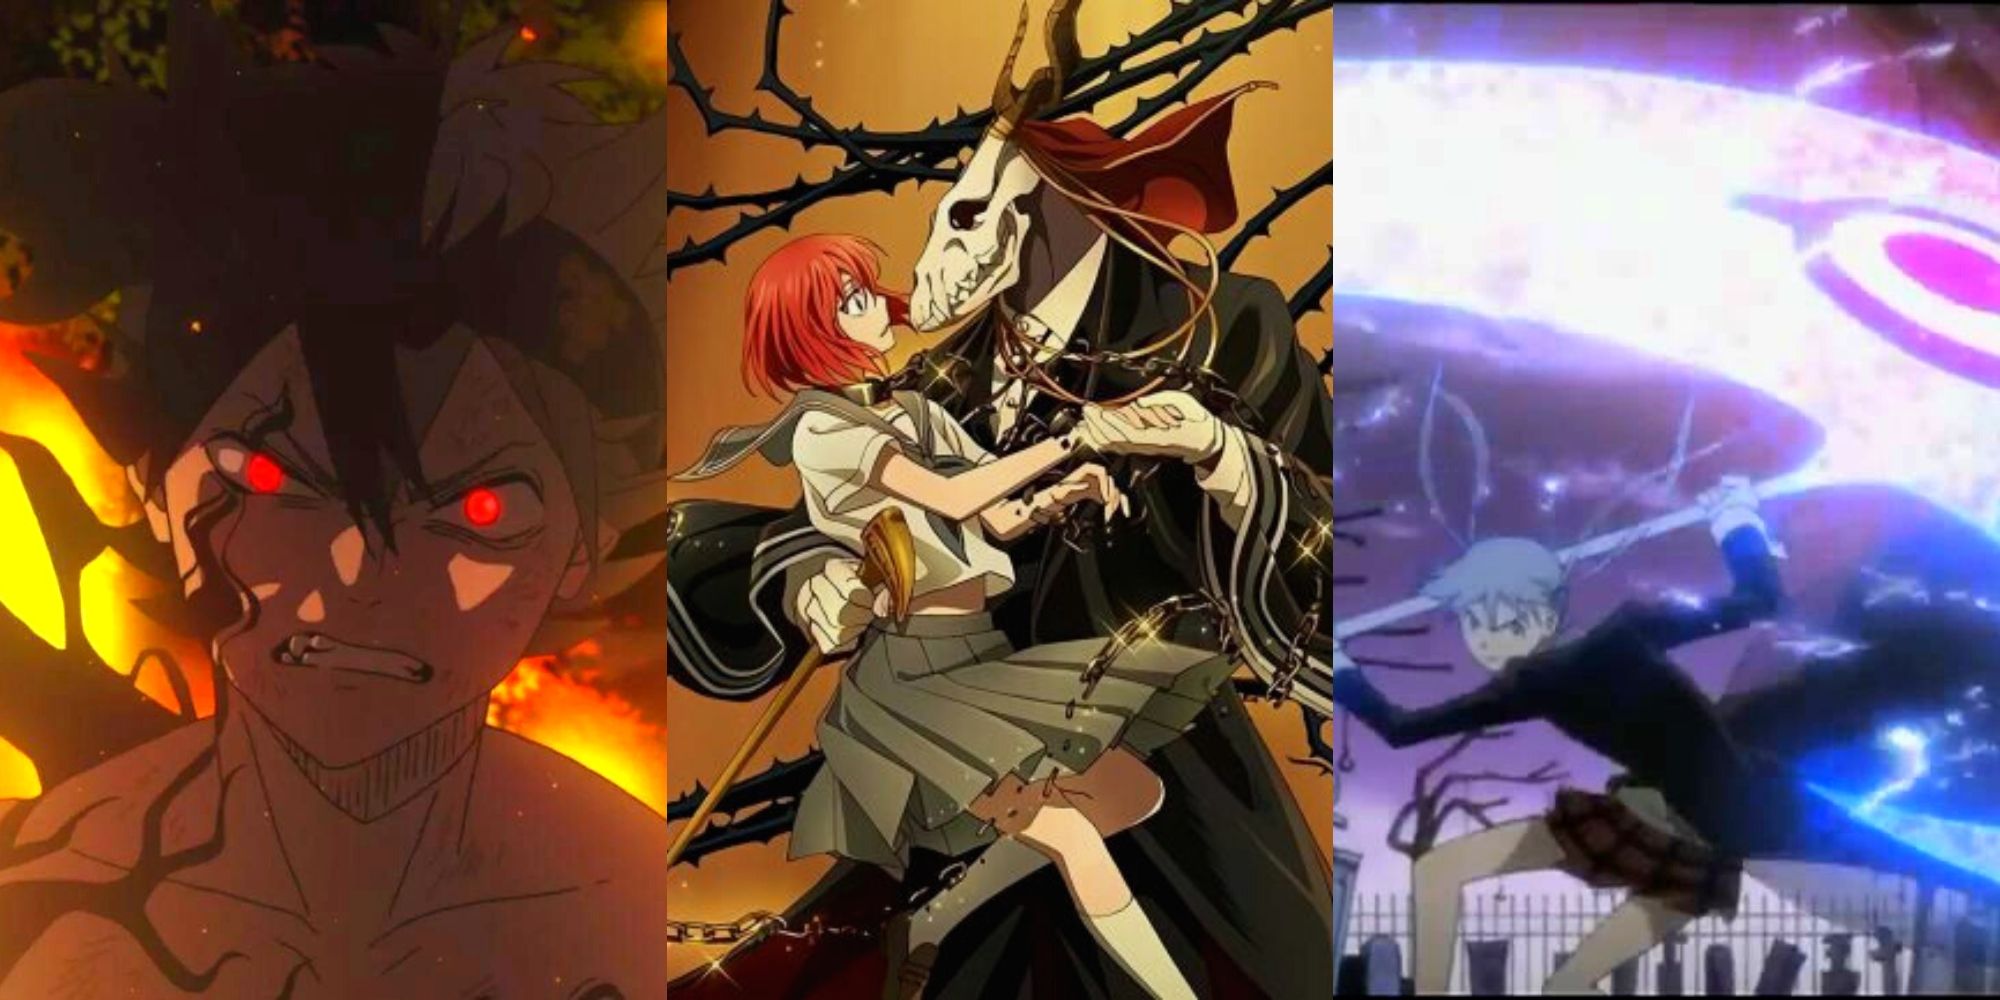 Asta in Black Clover, Chise and Elias in The Ancient Magus' Bride, Maka in Soul Eater